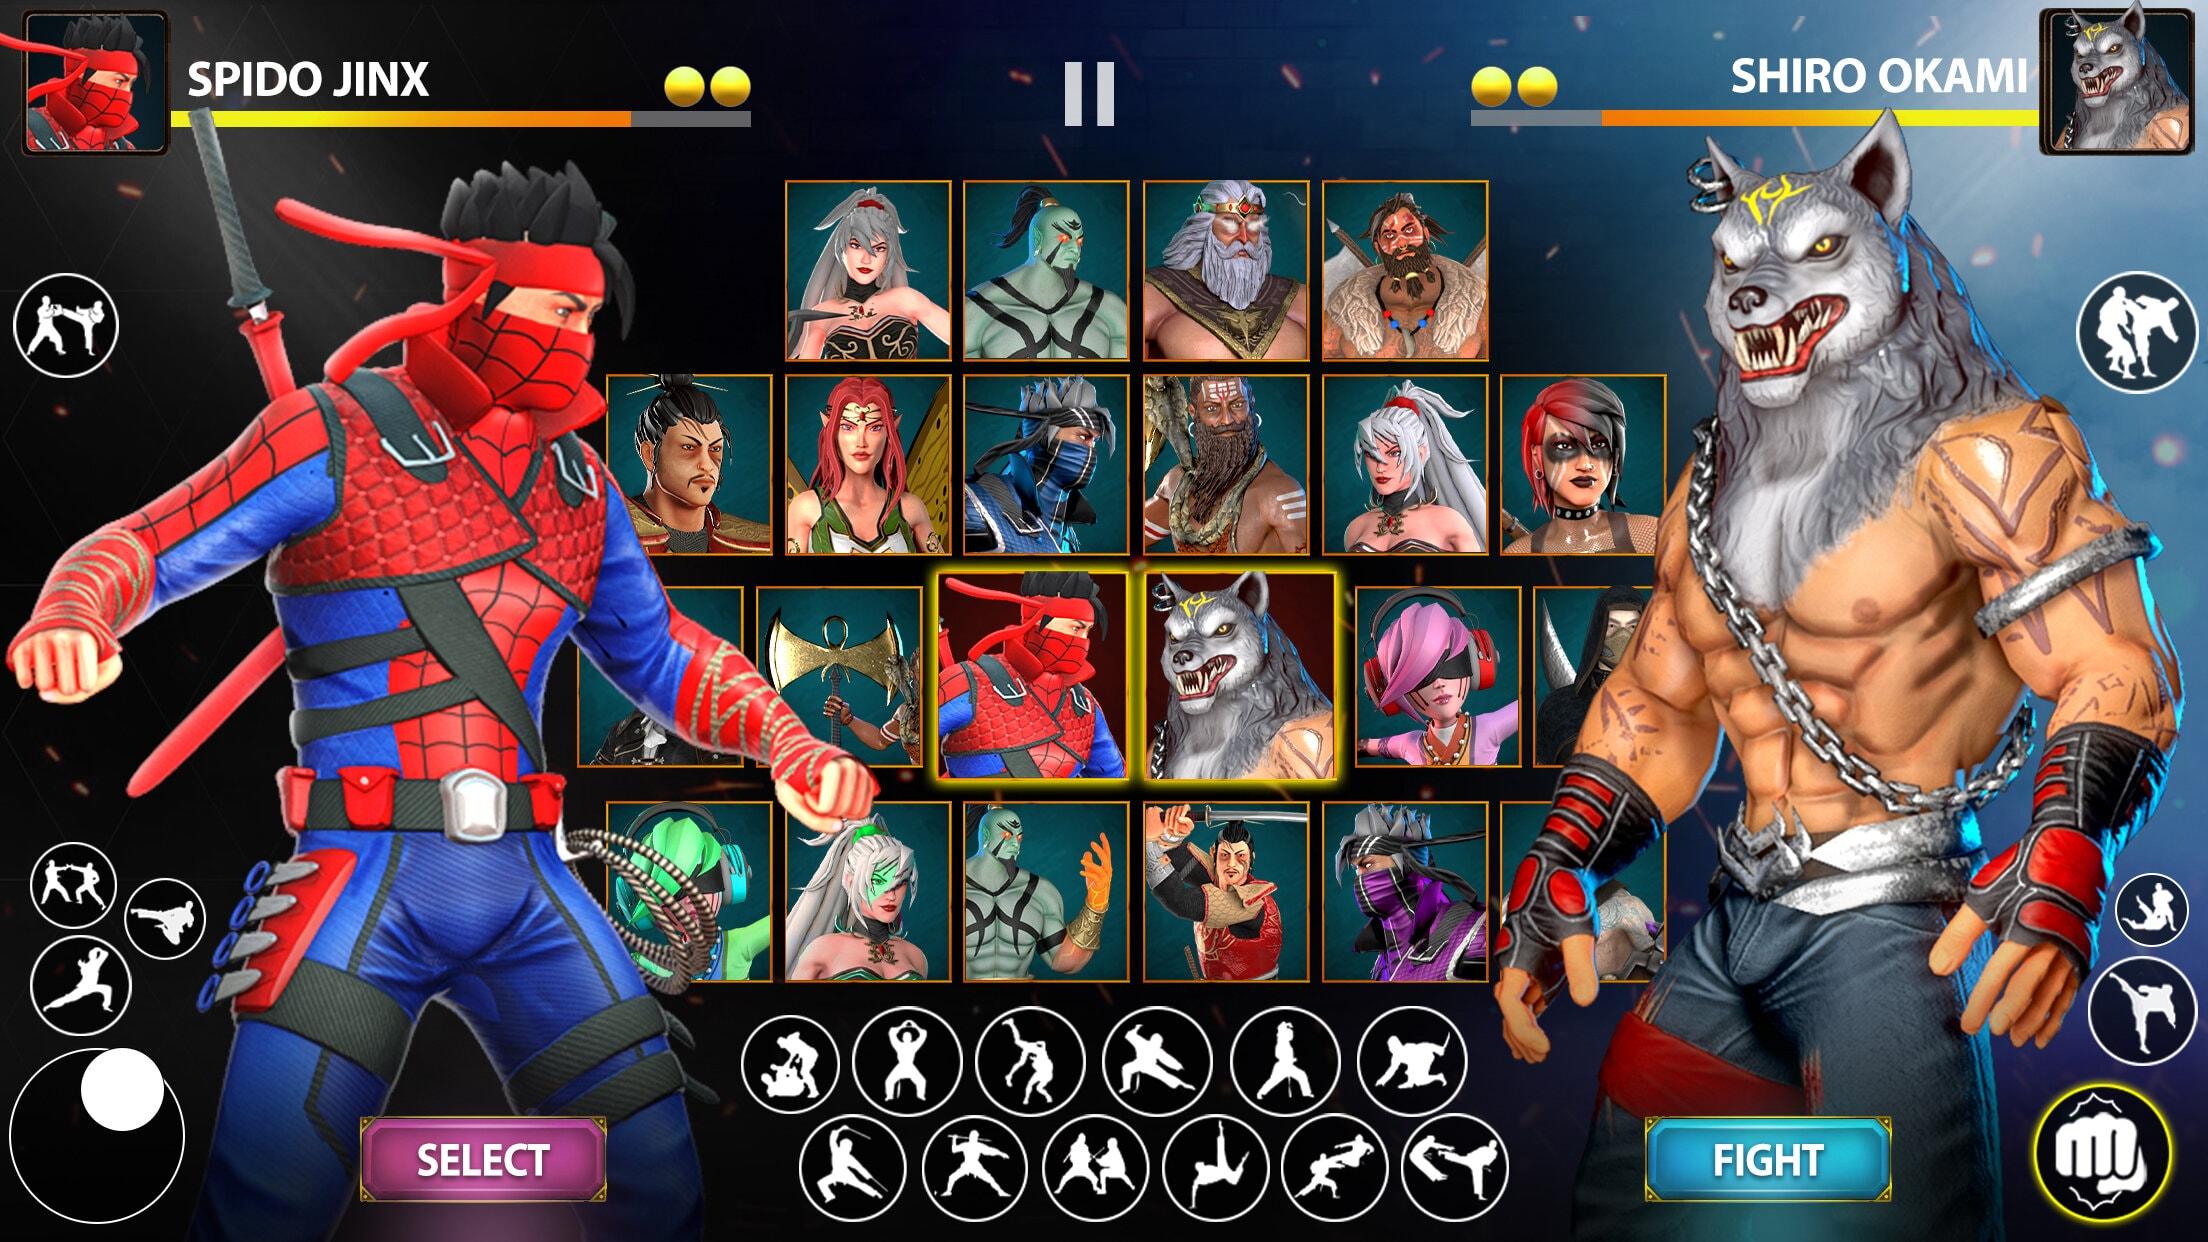 Download do APK de Multiverse Fighters para Android